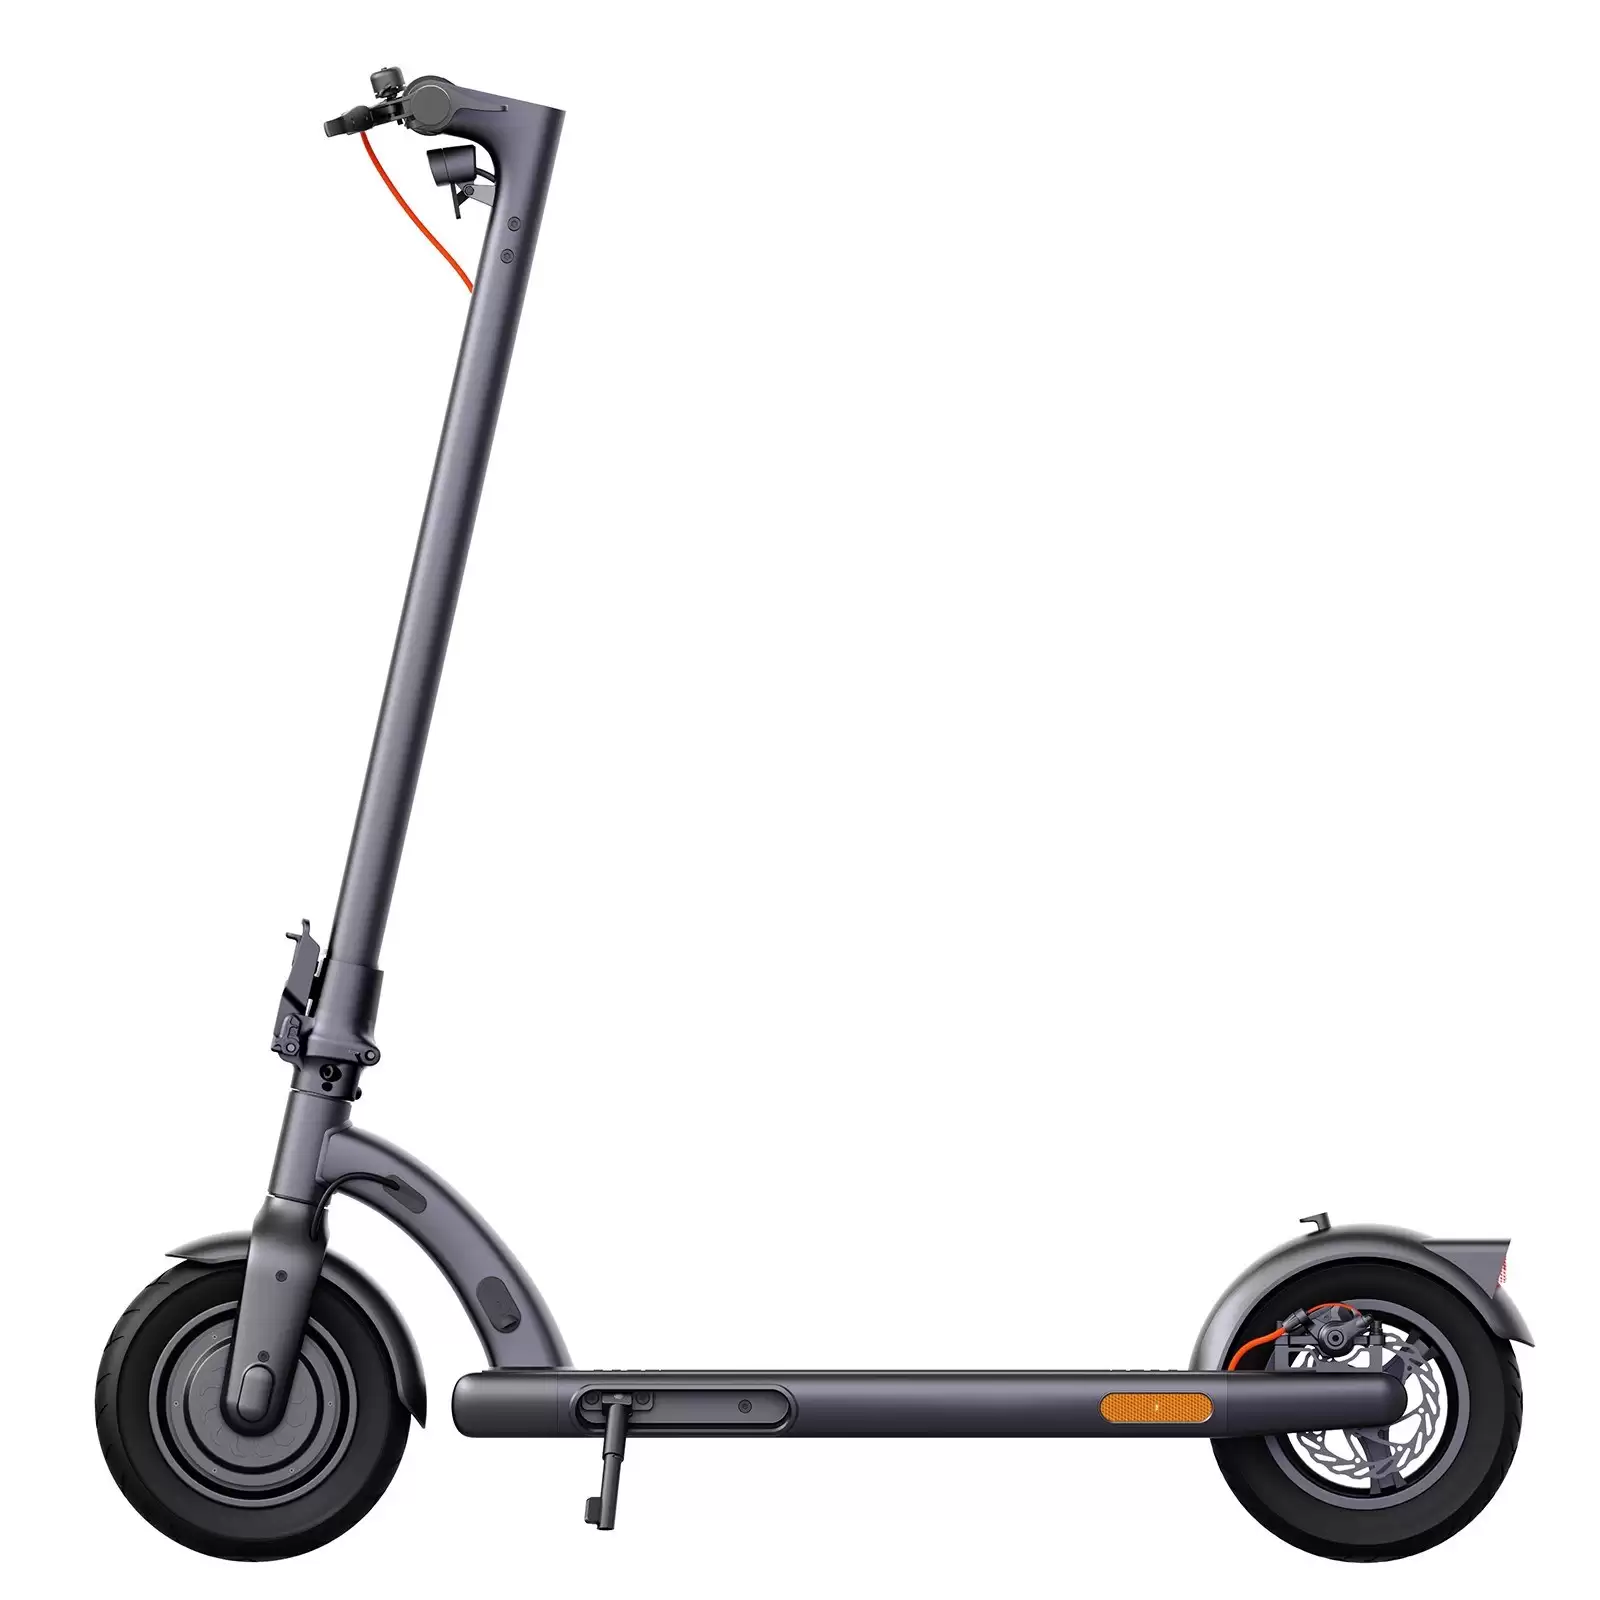 Order In Just $419 Navee N40 10-inch Pneumatic Tires Electric Scooter With This Tomtop Discount Voucher